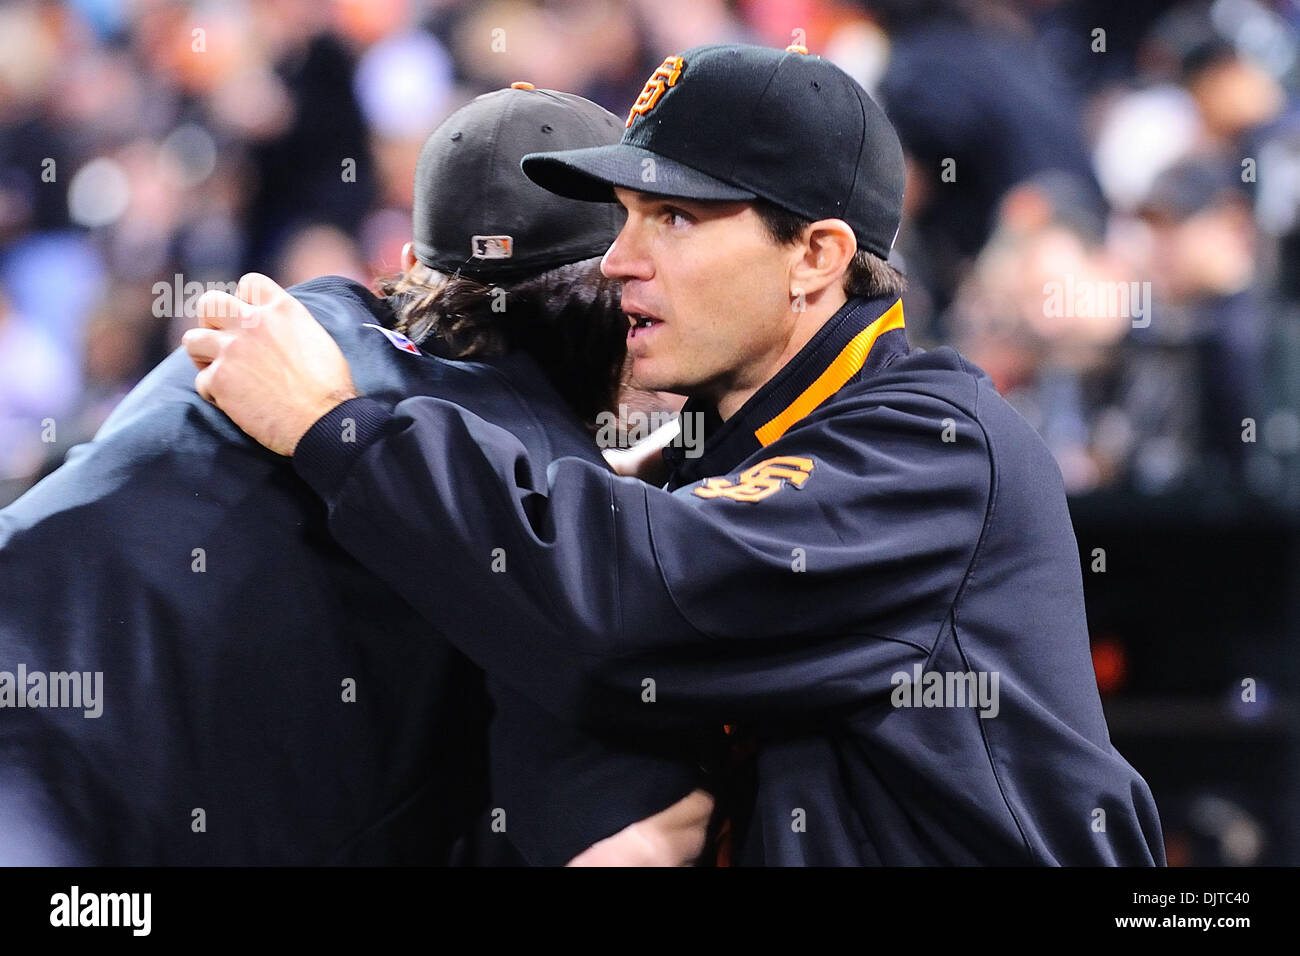 San Francisco, CA: San Francisco Giants' Cy Young award winner Tim Lincecum (55) congratulates game winning pitcher Barry Zito (75) as he enters the pitchers box. The Giants won the game 5-2. (Credit Image: © Charles Herskowitz/Southcreek Global/ZUMApress.com) Stock Photo